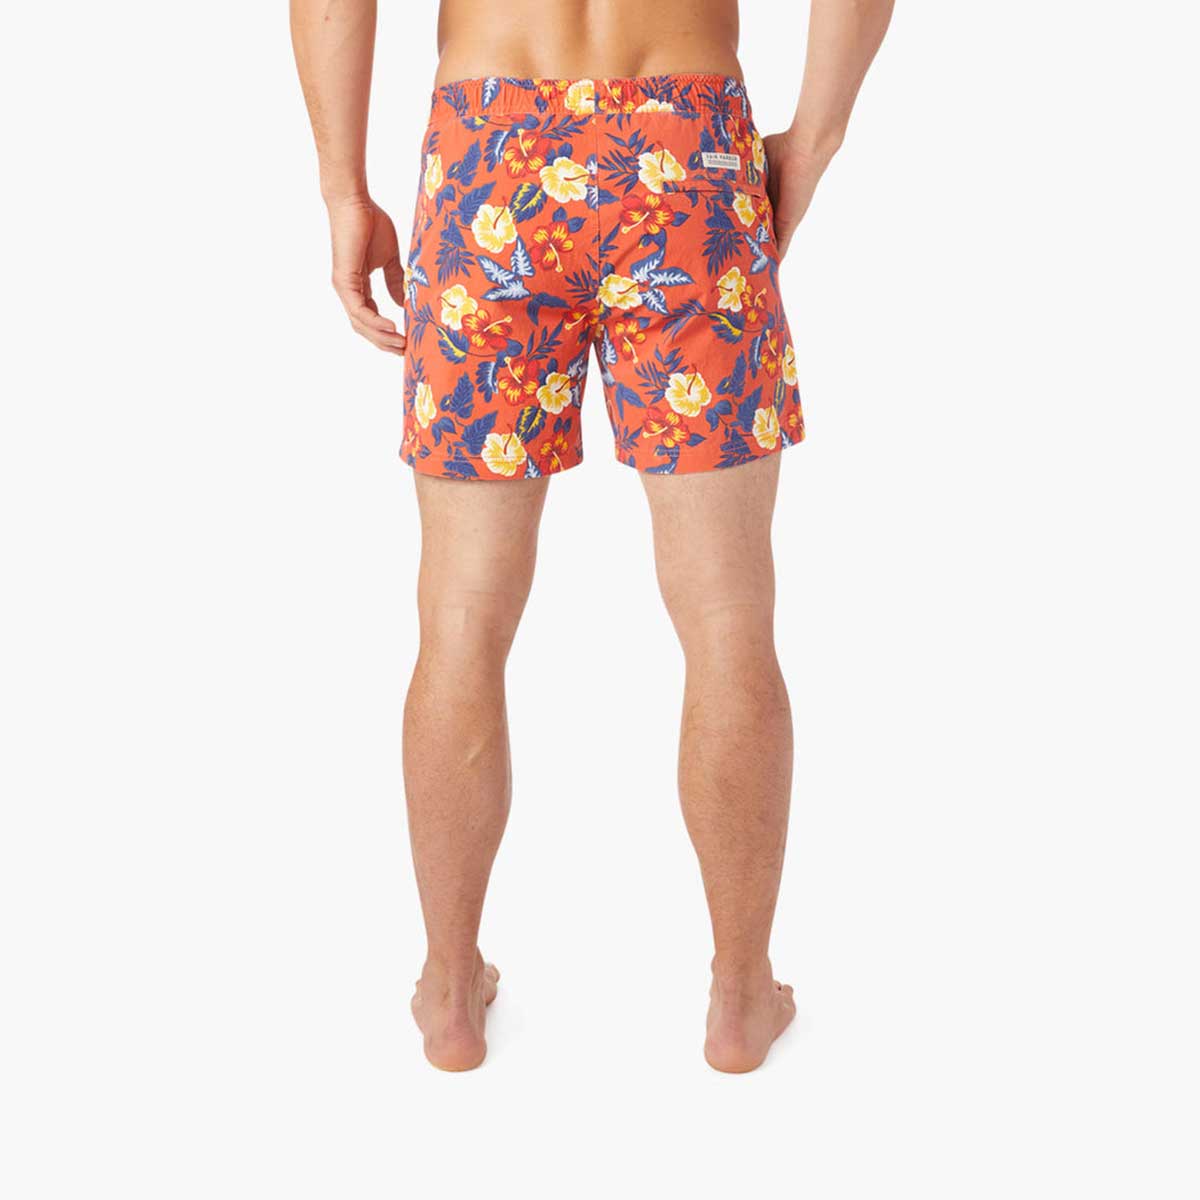 Fair Harbor: The Bungalow Red Tropics Volley 